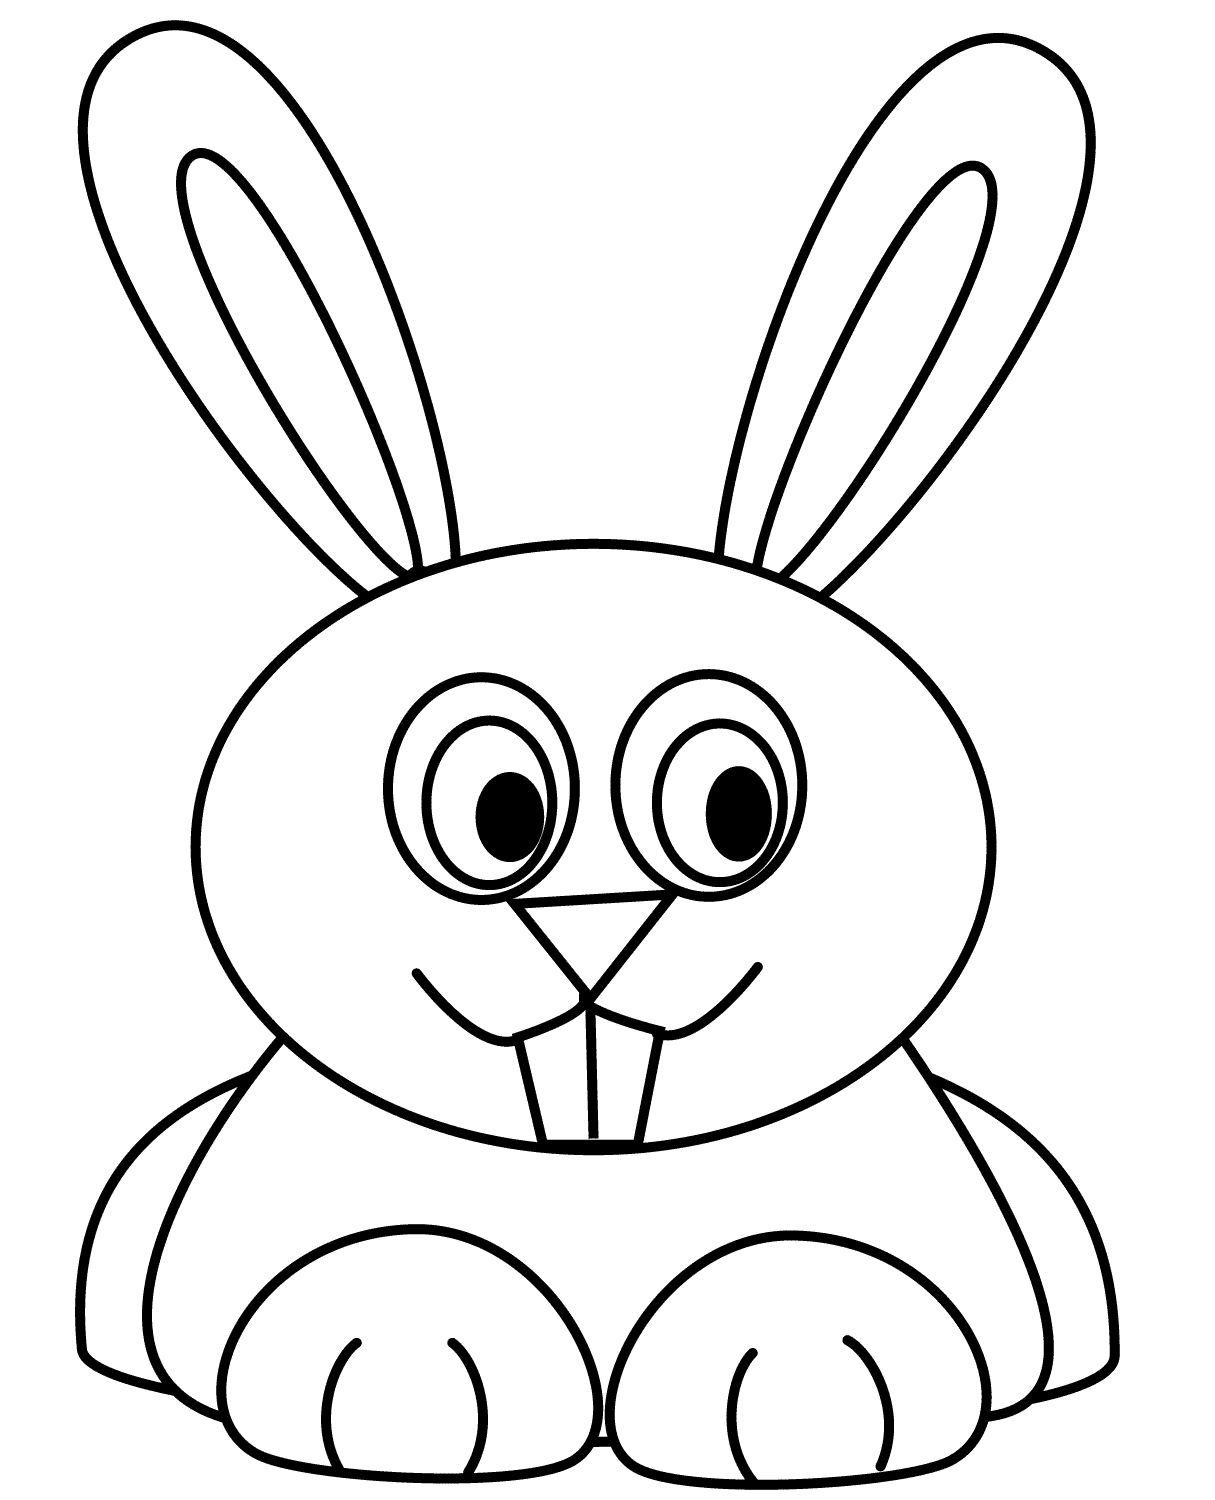 Silly Cartoon Rabbit Has Two Incisors Teeth On The Top Coloring Pages